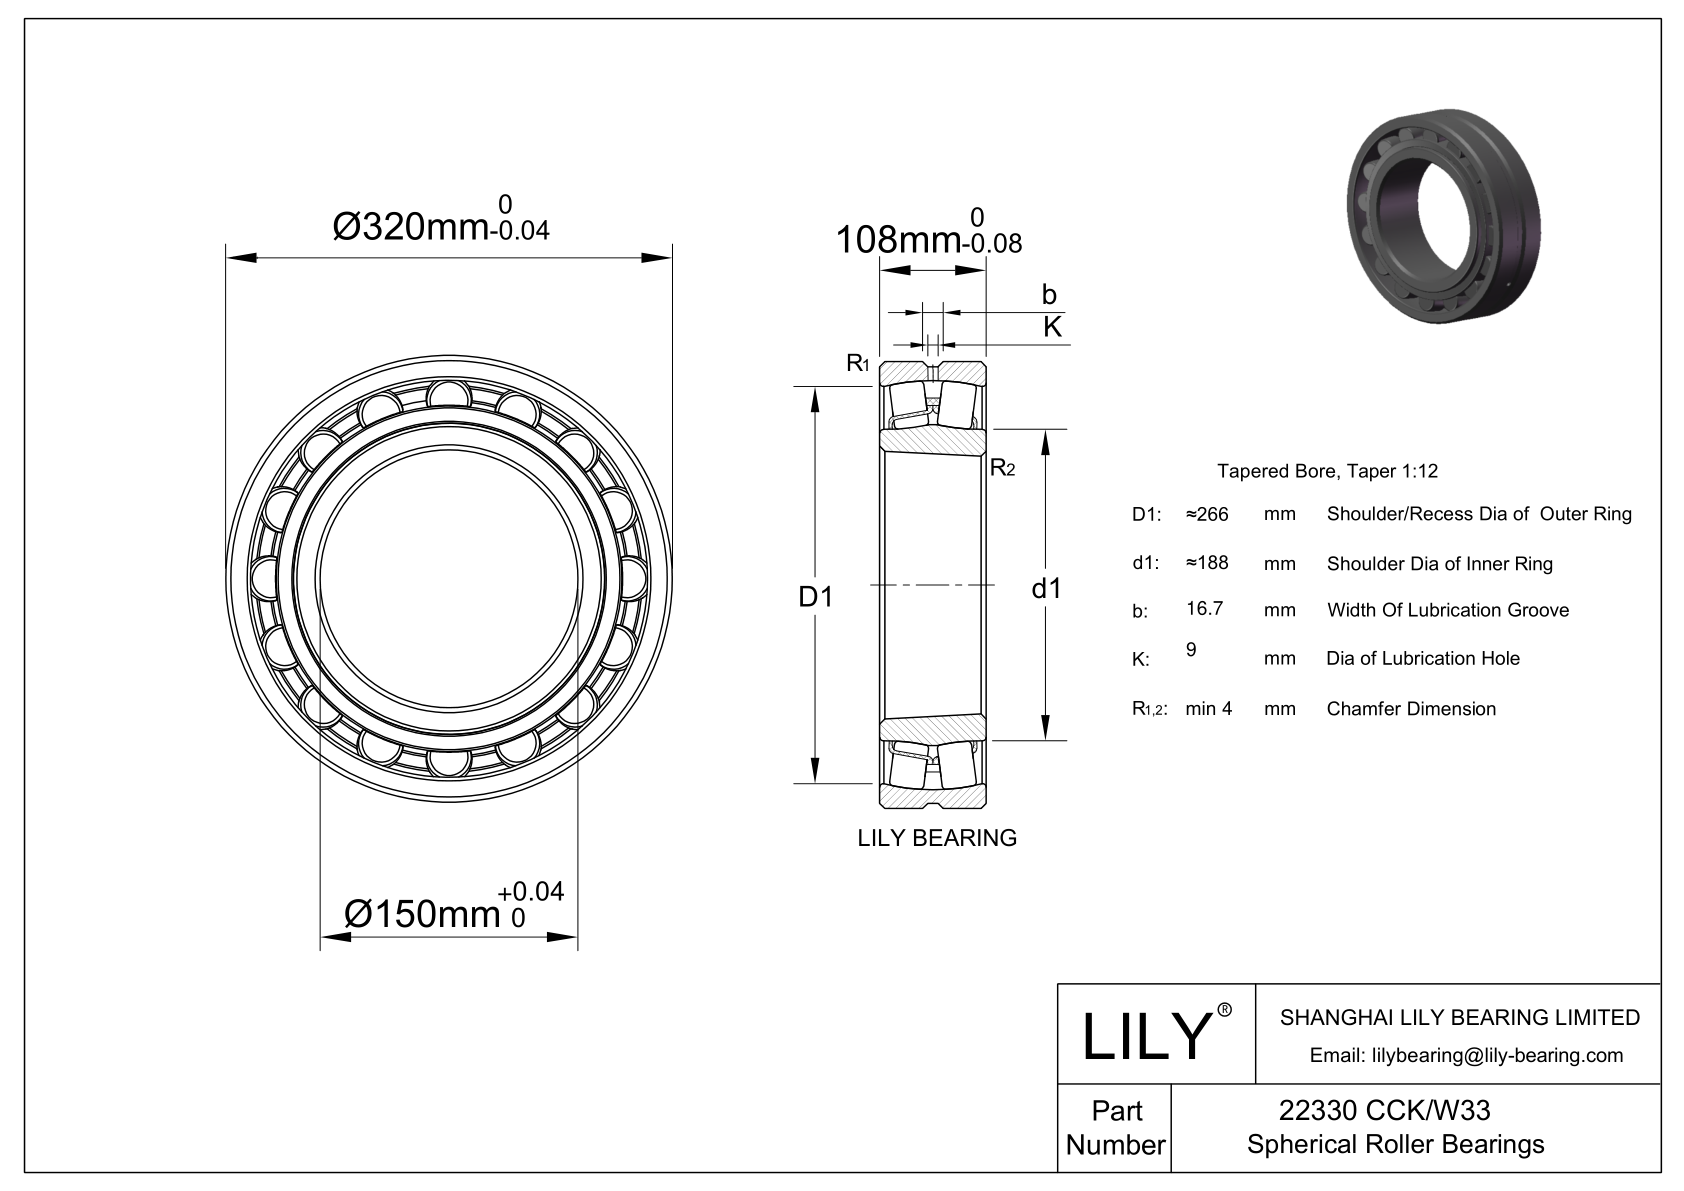 22330 CCK/W33 Double Row Spherical Roller Bearing cad drawing